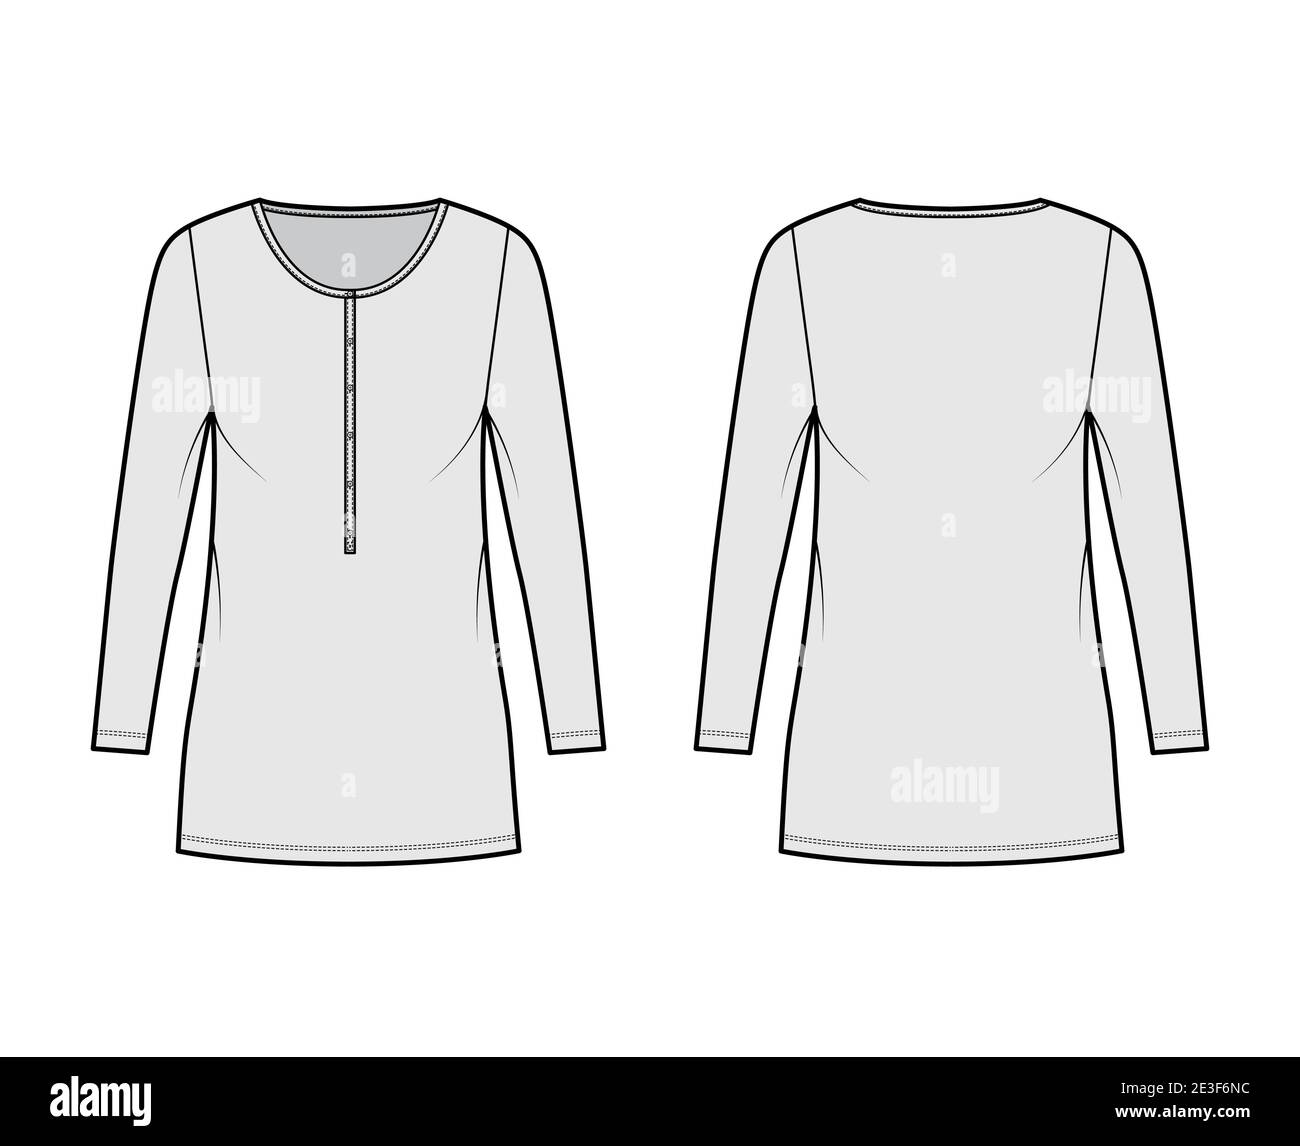 Shirt dress mini technical fashion illustration with henley neck, long sleeves, oversized, Pencil fullness, stretch jersey. Flat apparel template front, back, grey color. Women, men, unisex CAD mockup Stock Vector